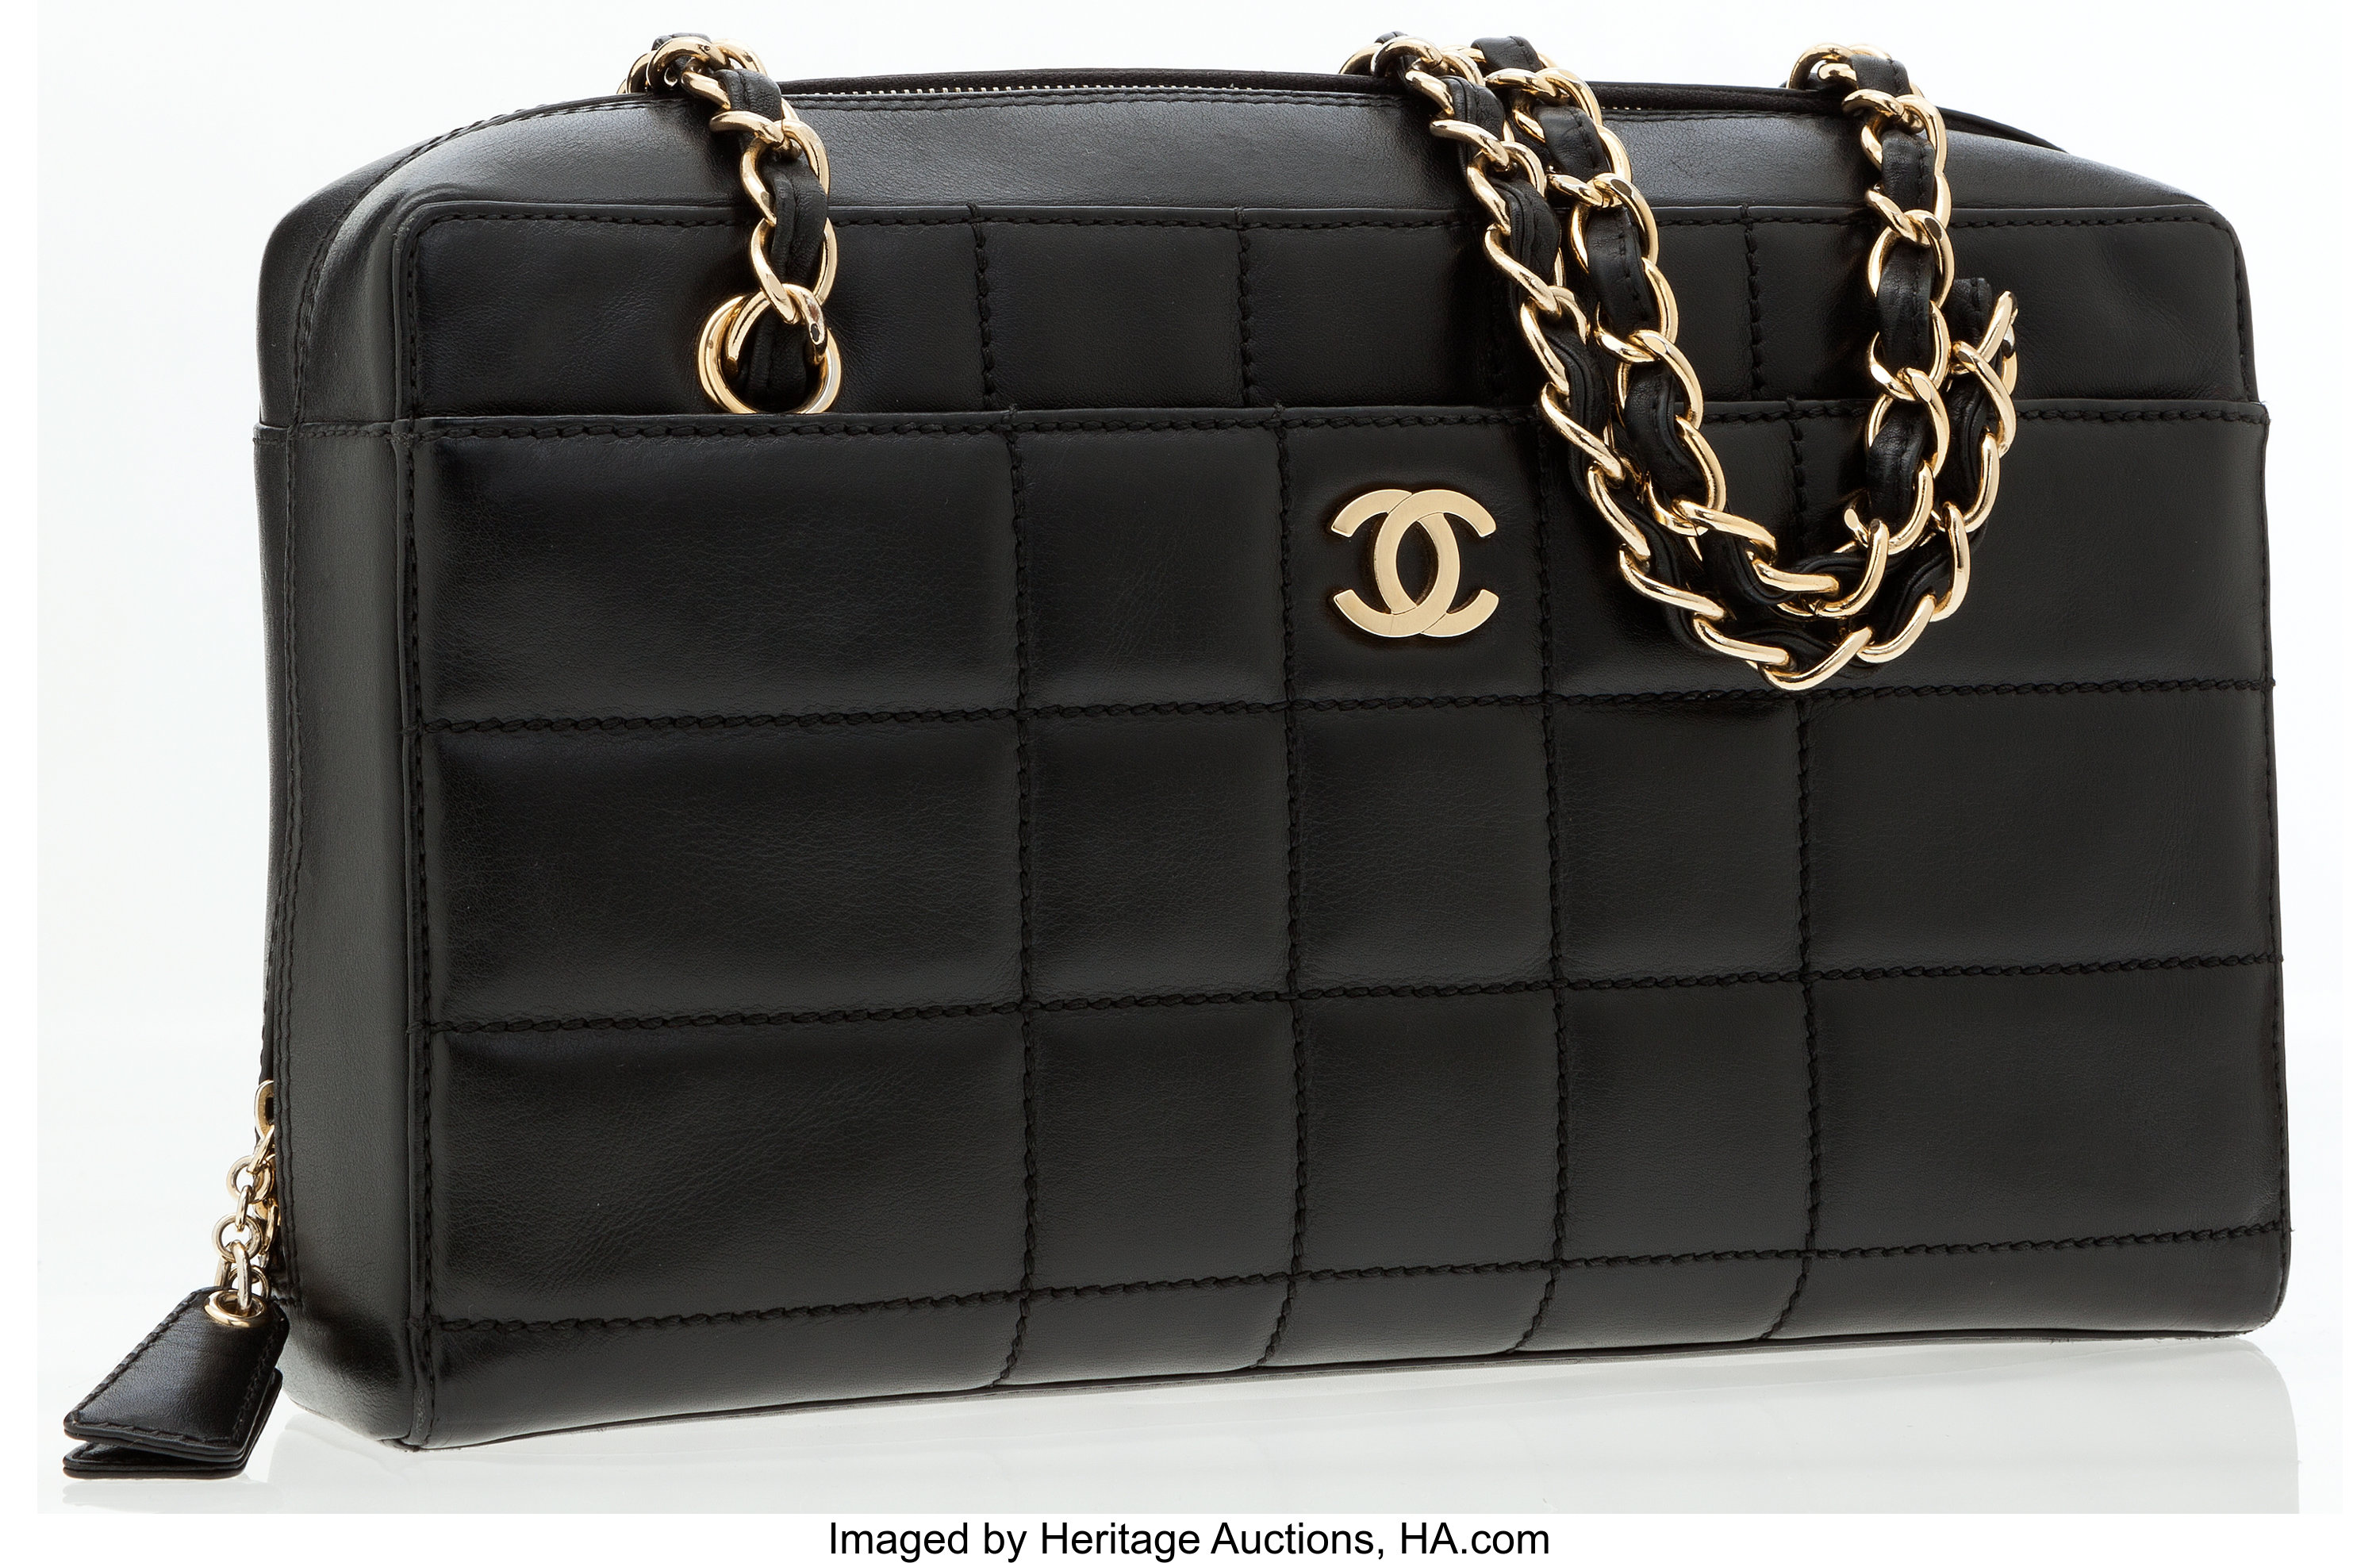 Chanel Black Quilted Leather Chocolate Bar Bag.  Luxury